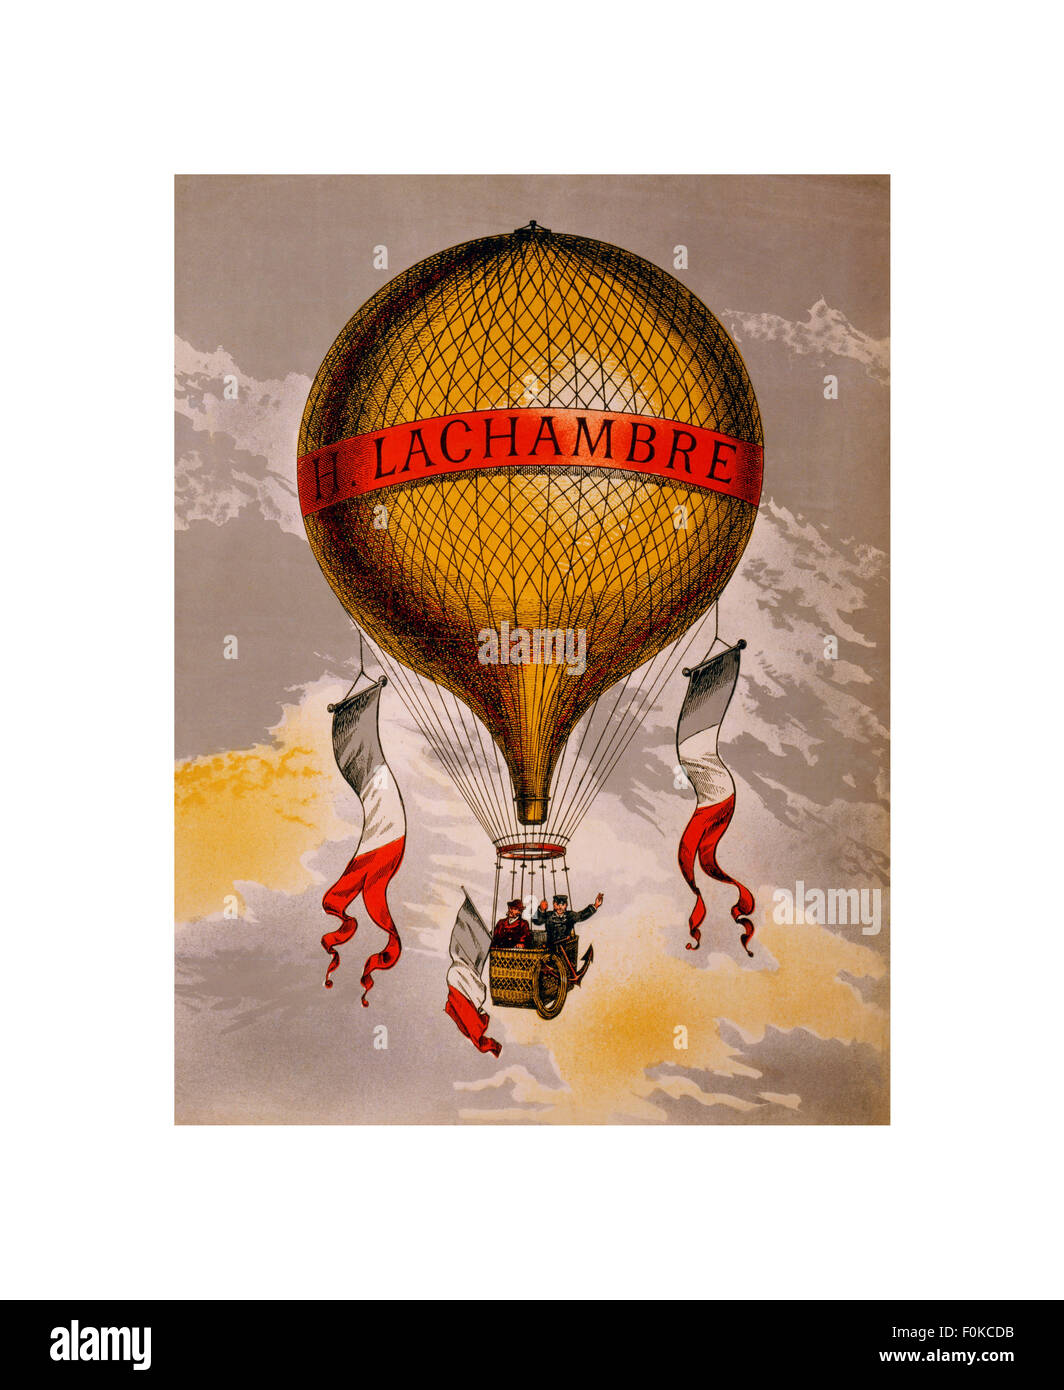 VINTAGE HOT AIR BALLOON FABRICANT Henri Lachambre - Vintage French Hot Air Balloon Voyage Voyage Tour Poster 1890 Banque D'Images